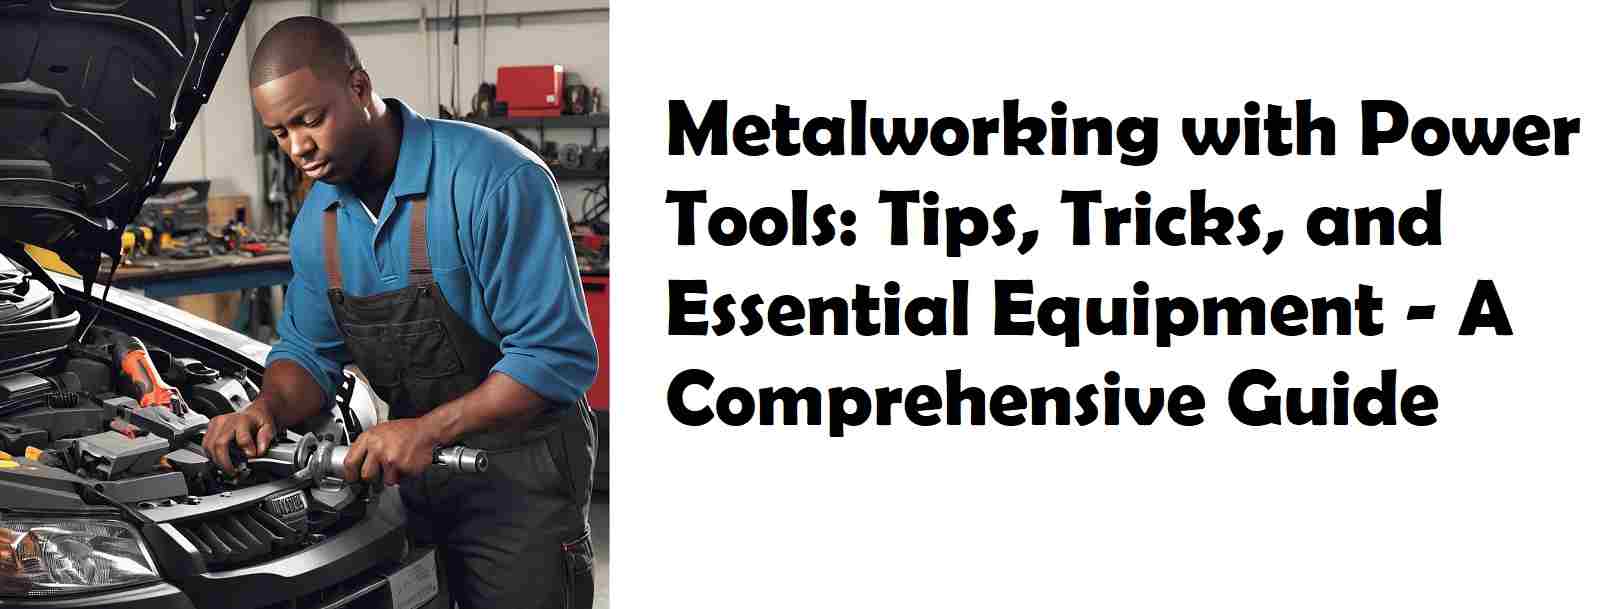 Metalworking with Power Tools